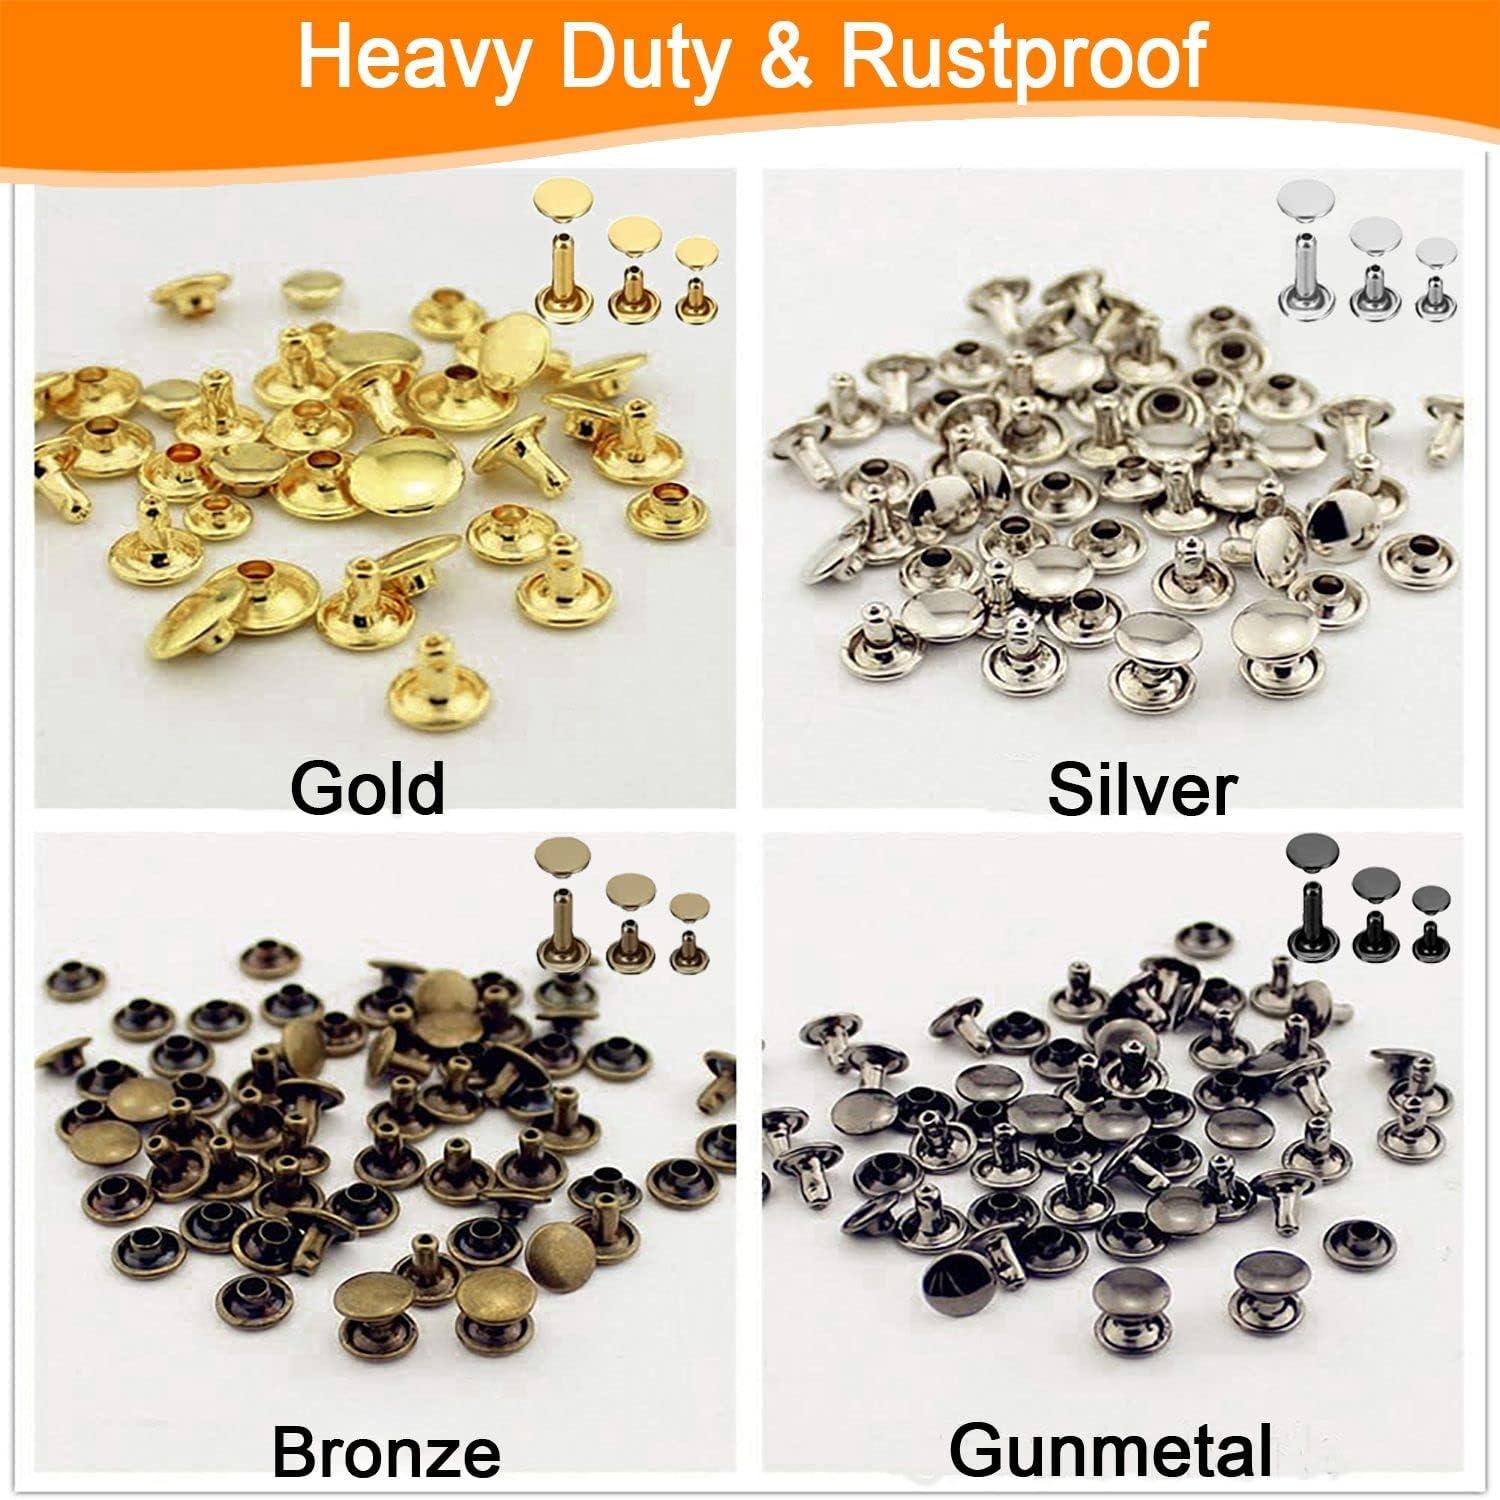 420 Sets Leather Rivets Kit Double Cap Brass Rivets Leather Studs with 3PCS  Setting Tools for Leather Repair and Crafts 4 Colors and 3 Sizes 420 Pack